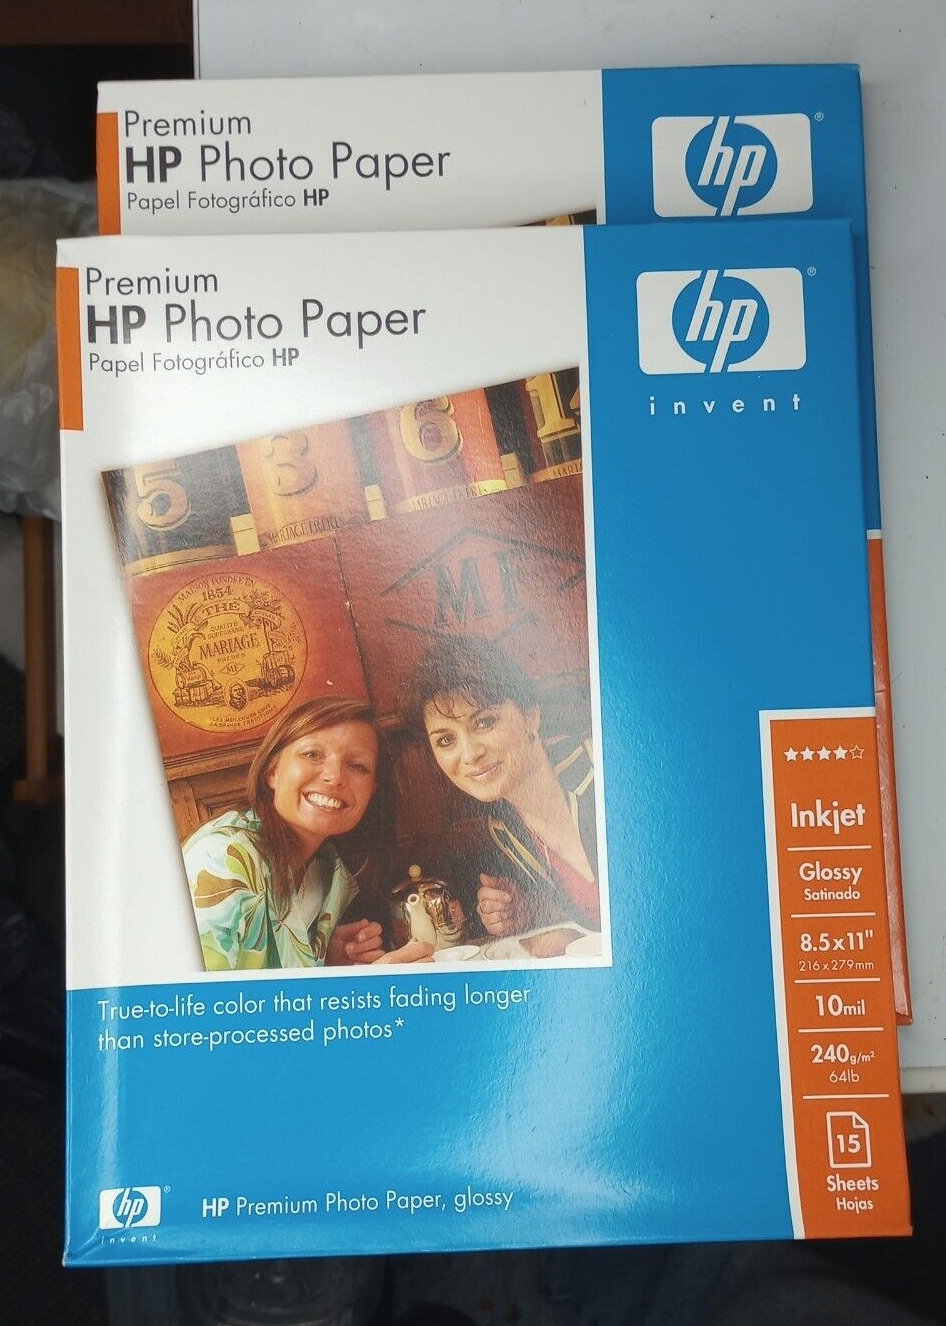 HP Premium 15 Count Photo Paper 8.5 x 11 Lot of 2 - 30 Total Sheets.